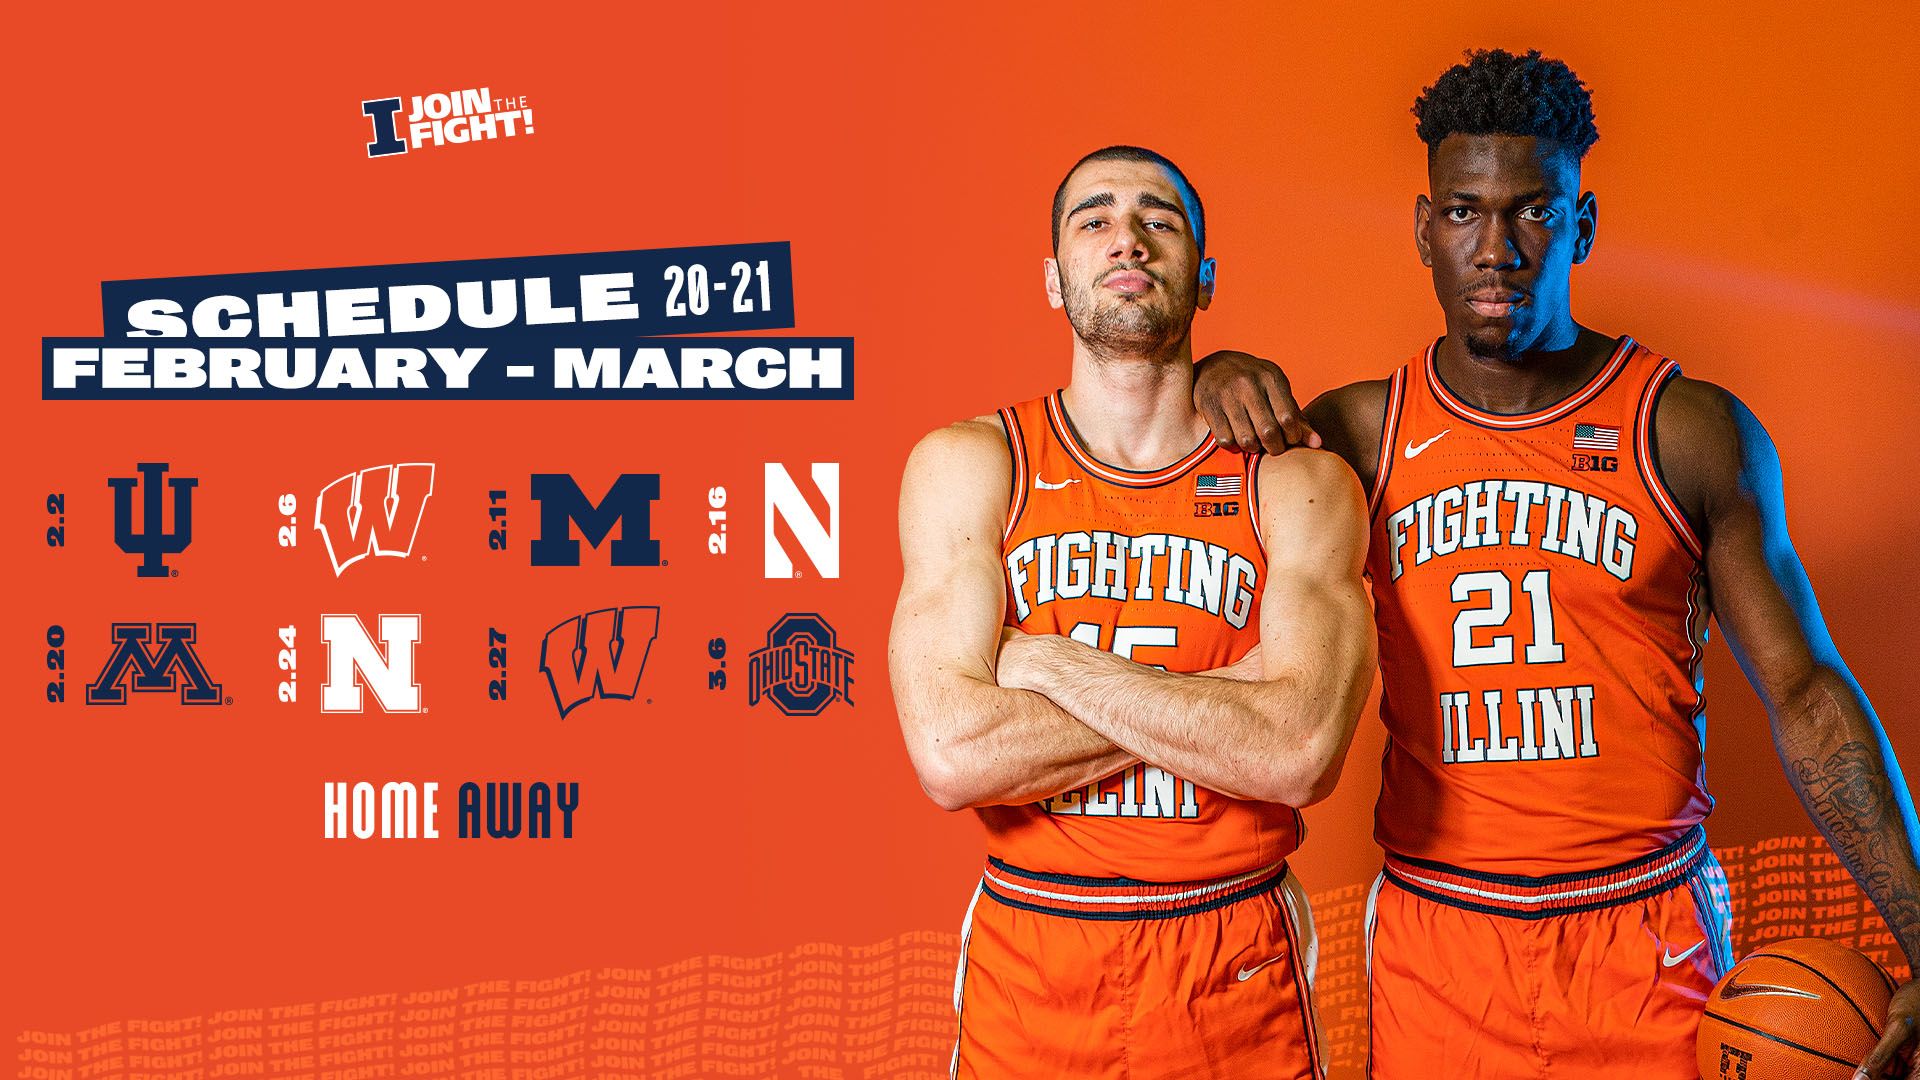 Poster & Wallpaper Downloads of Illinois Athletics